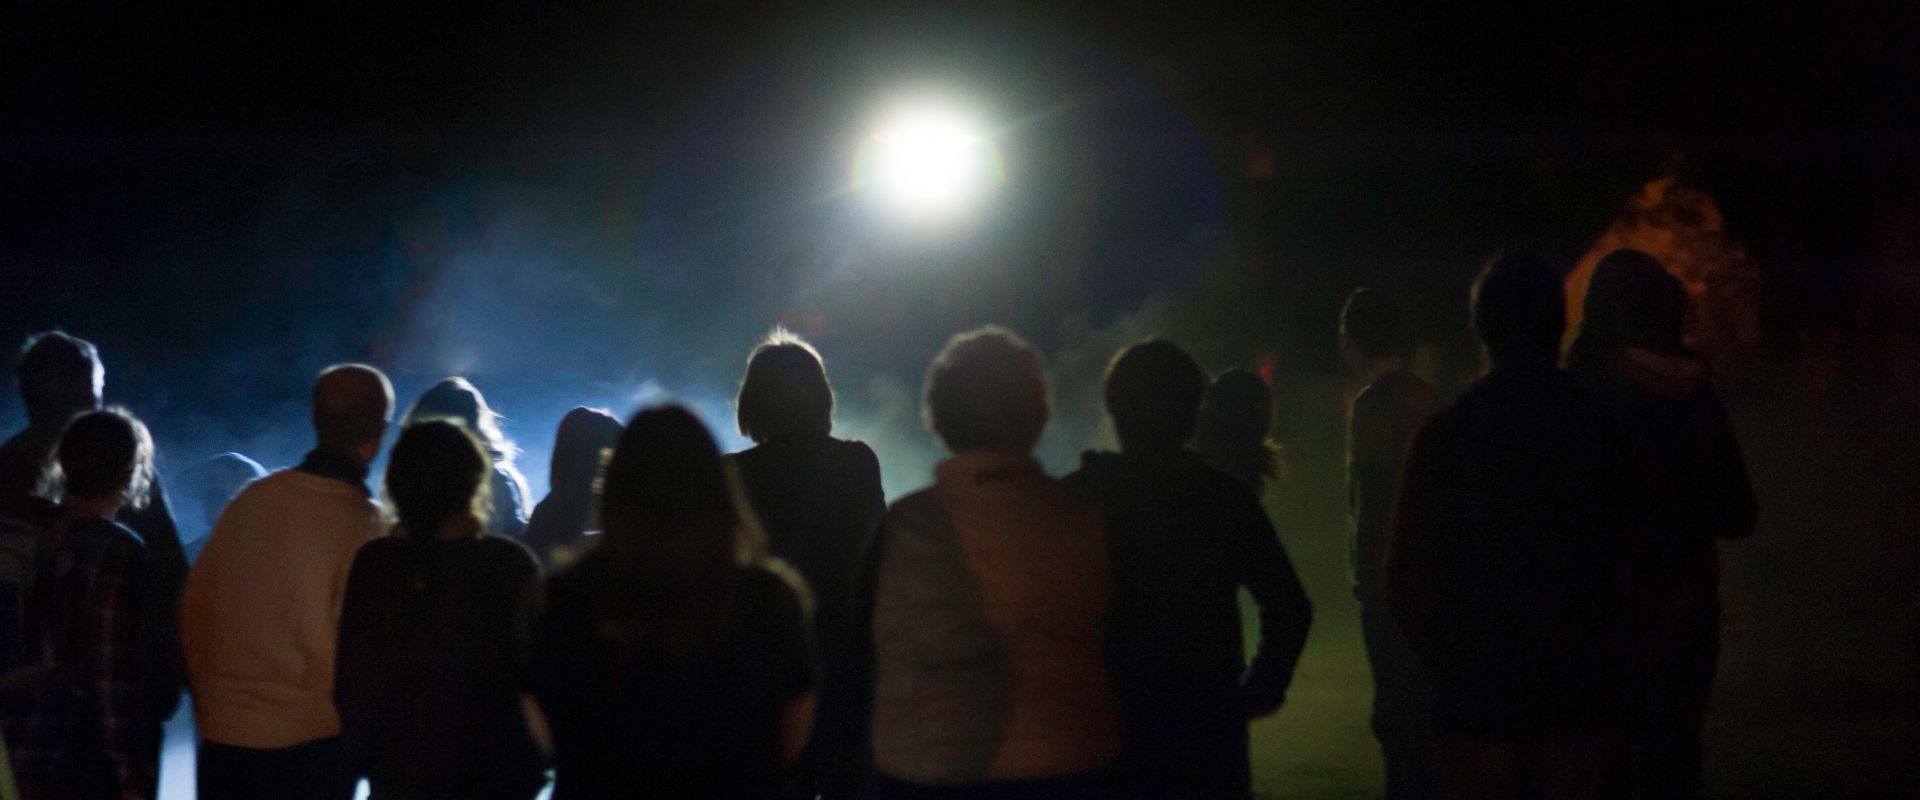 Silhouette of audience at night, watching a glowing light in the sky above them.